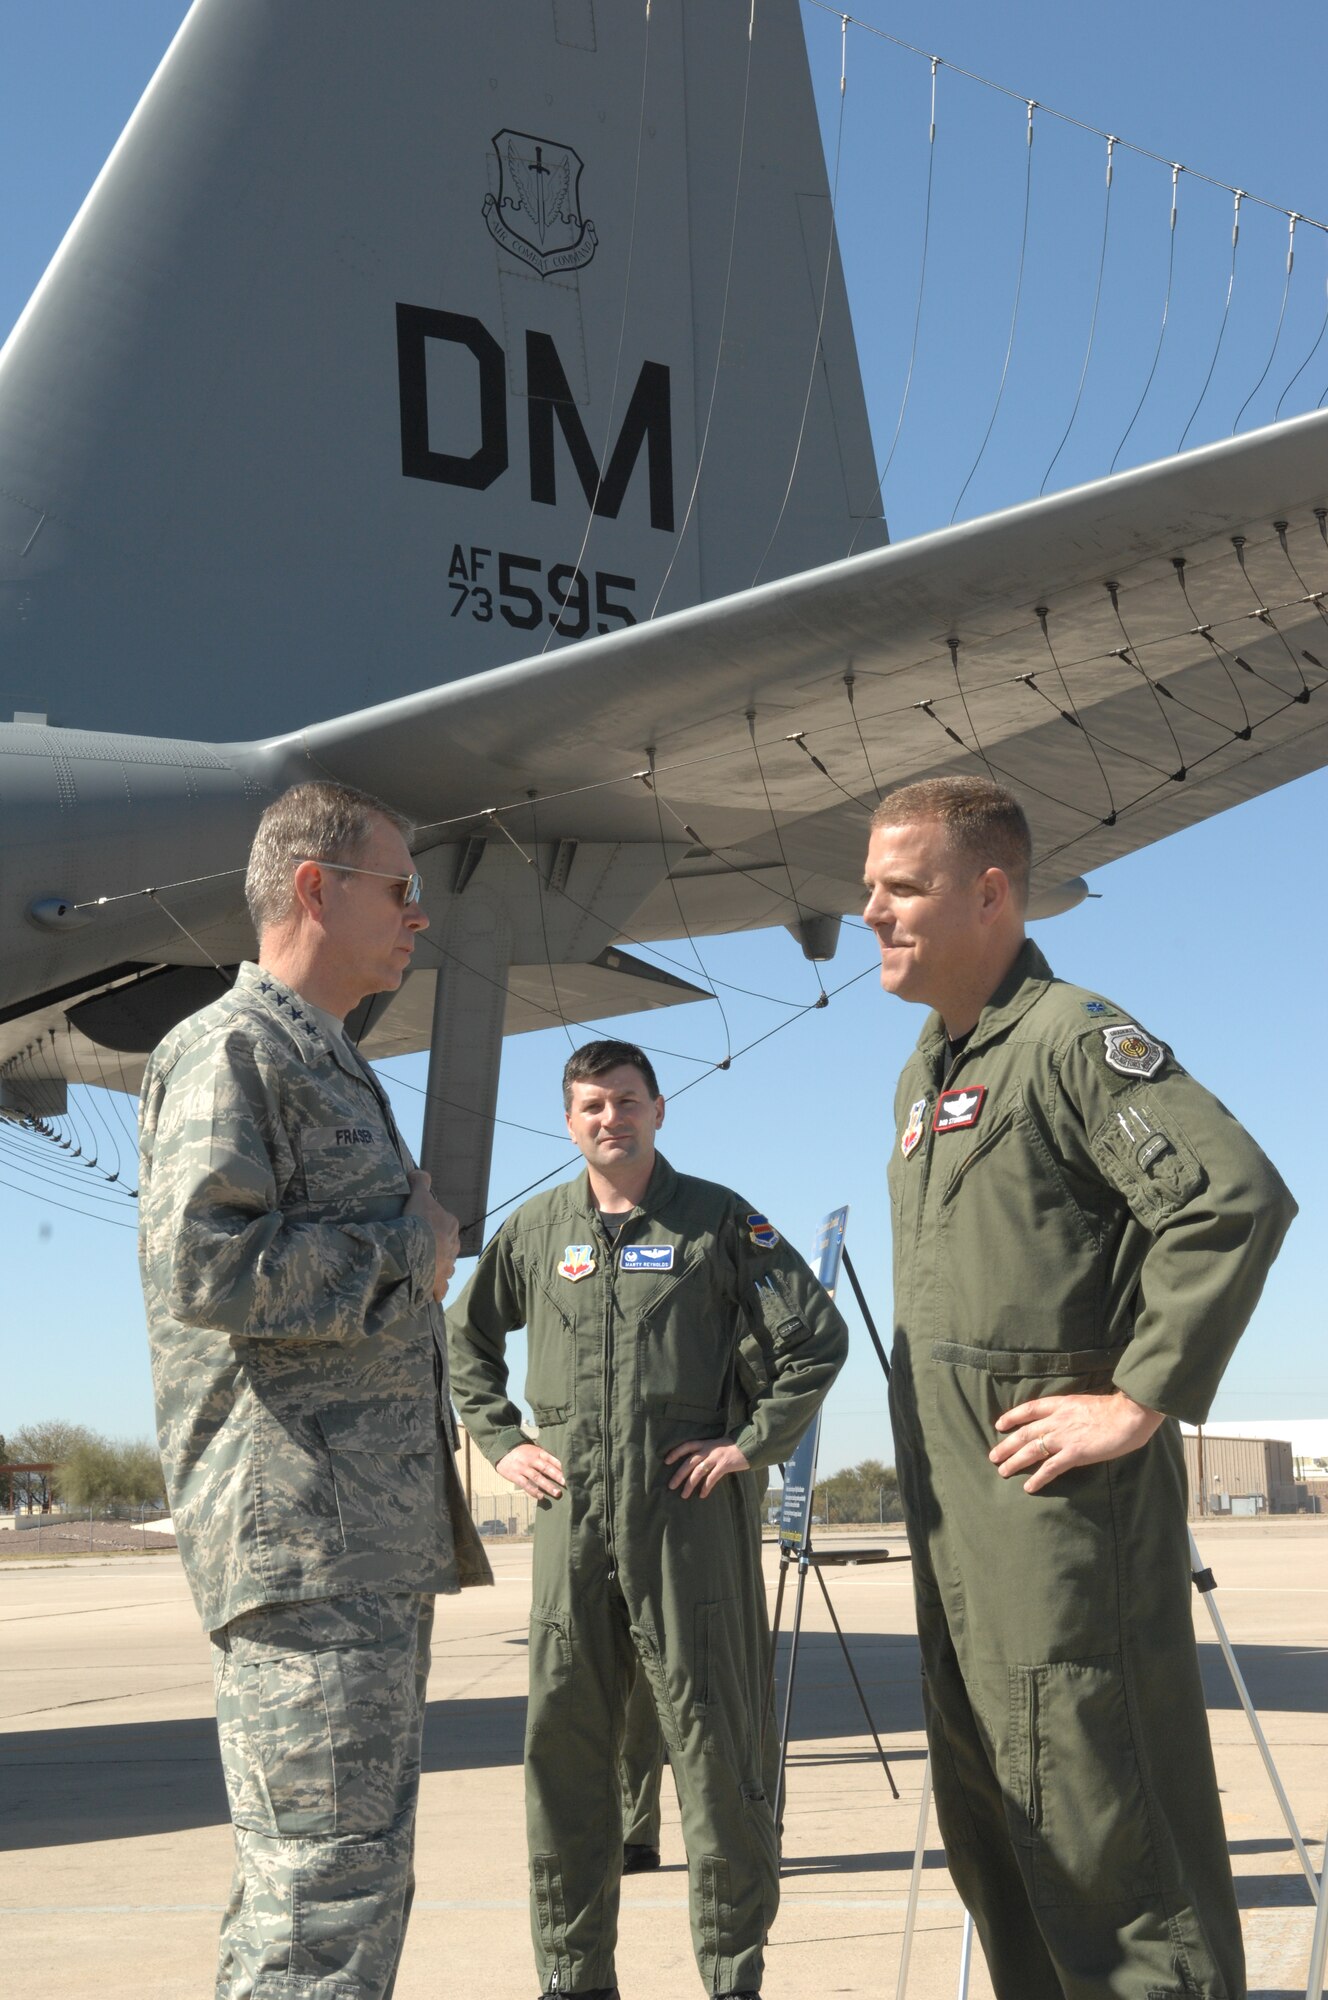 Gen. William M. Fraser III speaks to Lt. Col. Marty Reynolds (center), and Lt. Col. Bob Stonemark (right) on the flightline during his tour of Davis-Monthan Air Force Base, Feb. 23, 2010. General Fraser is the commander of Air Combat Command. Colonel Reynolds is the 42nd Electronic Combat Squadron commander. Colonel Stonemark is the 43rd Electronic Combat Squadron commander. (U.S. Air Force photo/Staff Sgt. Alesia Goosic)